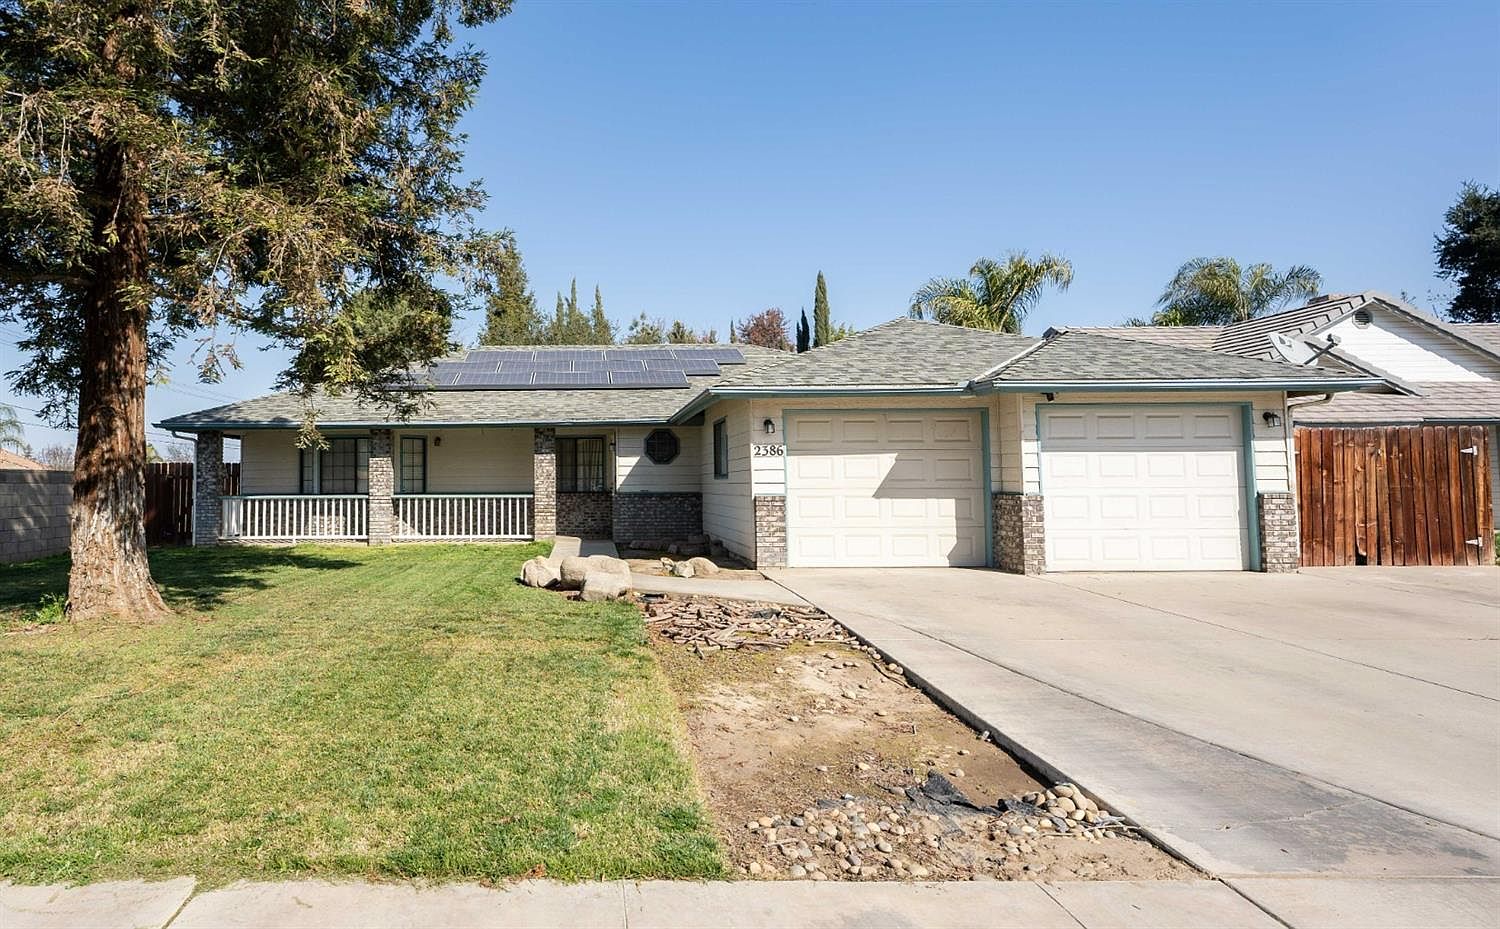 2386 W Roby Ave, Porterville, CA 93257 | Zillow